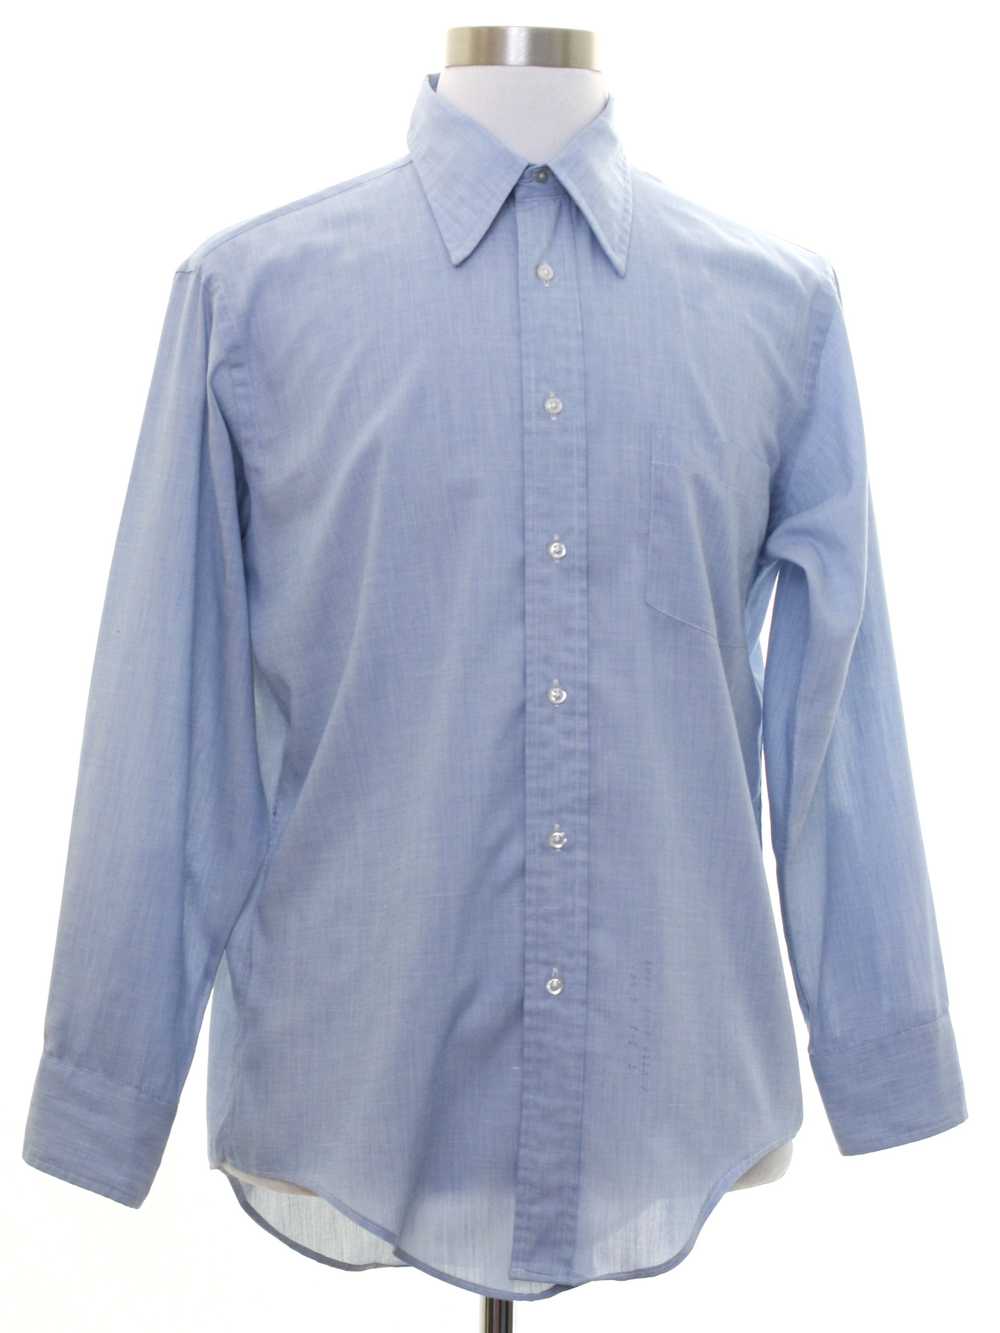 1960's Squire Mens Mod Shirt - image 1